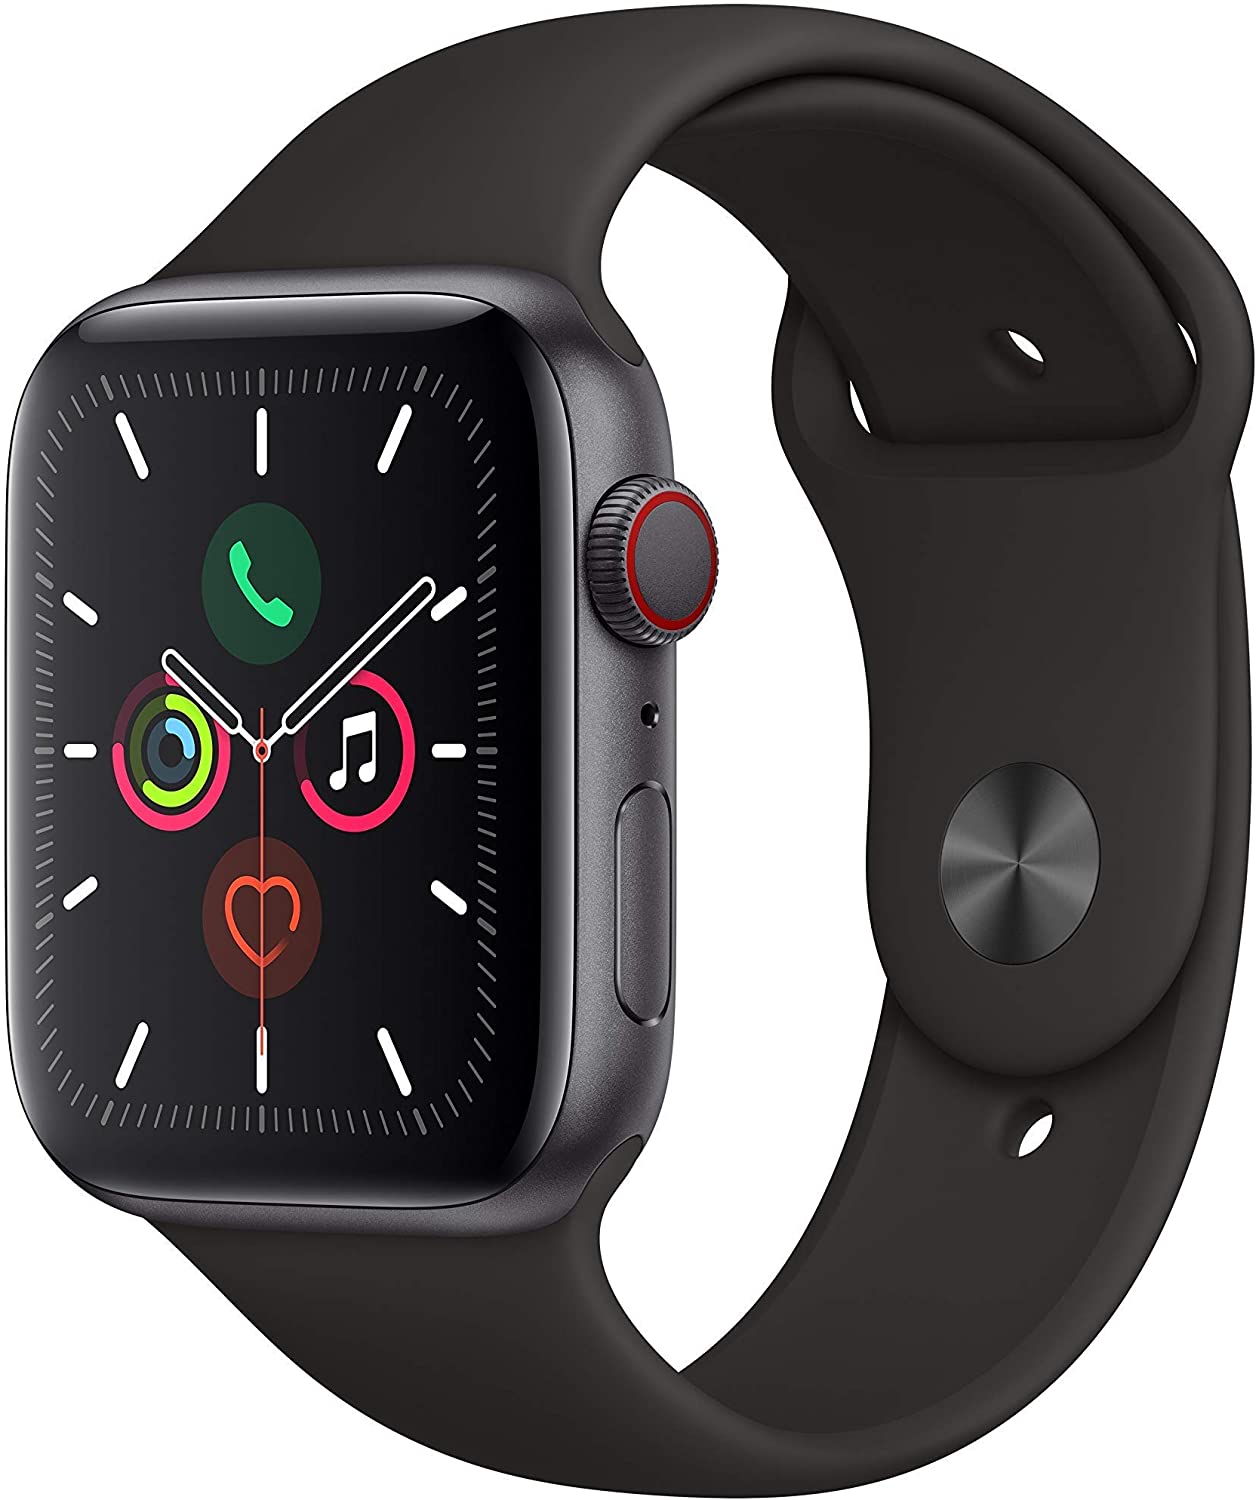 (Refurbished) Apple Watch Series 5 (GPS + Cellular, 44MM) - Space Gray Aluminum Case with Black Sport Band